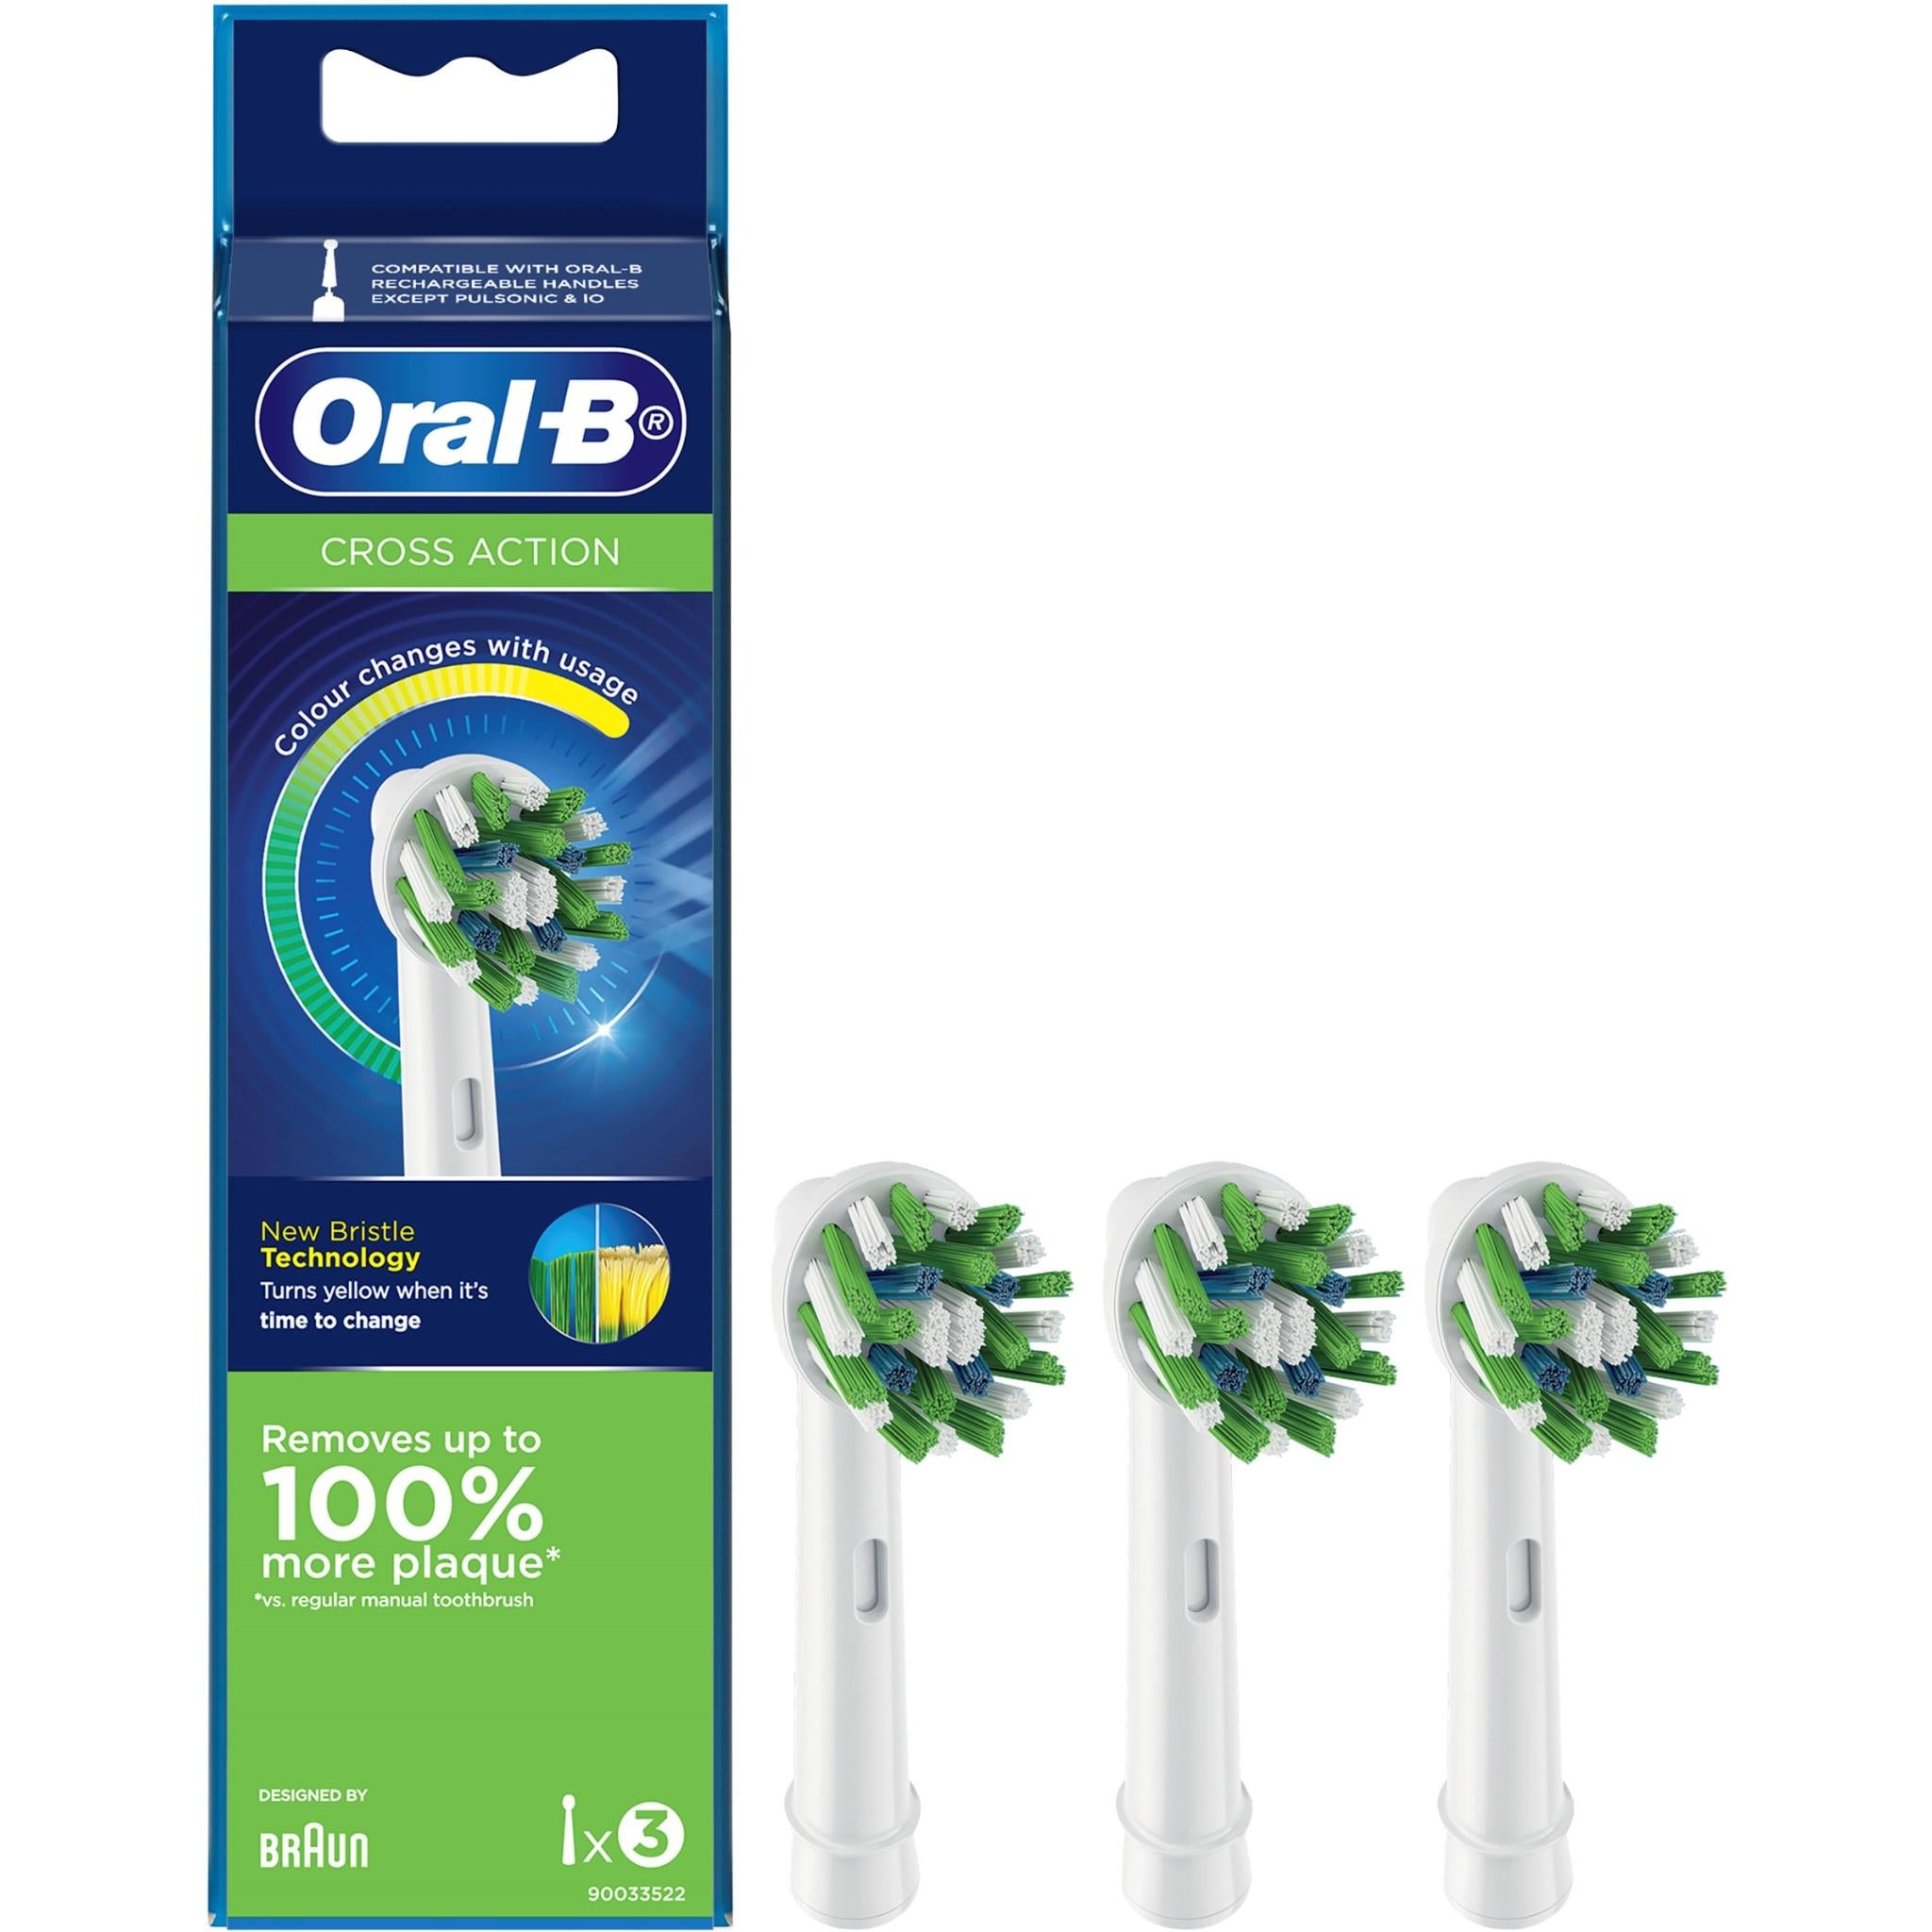 oral-b cross action replacement brush heads (3 pack)